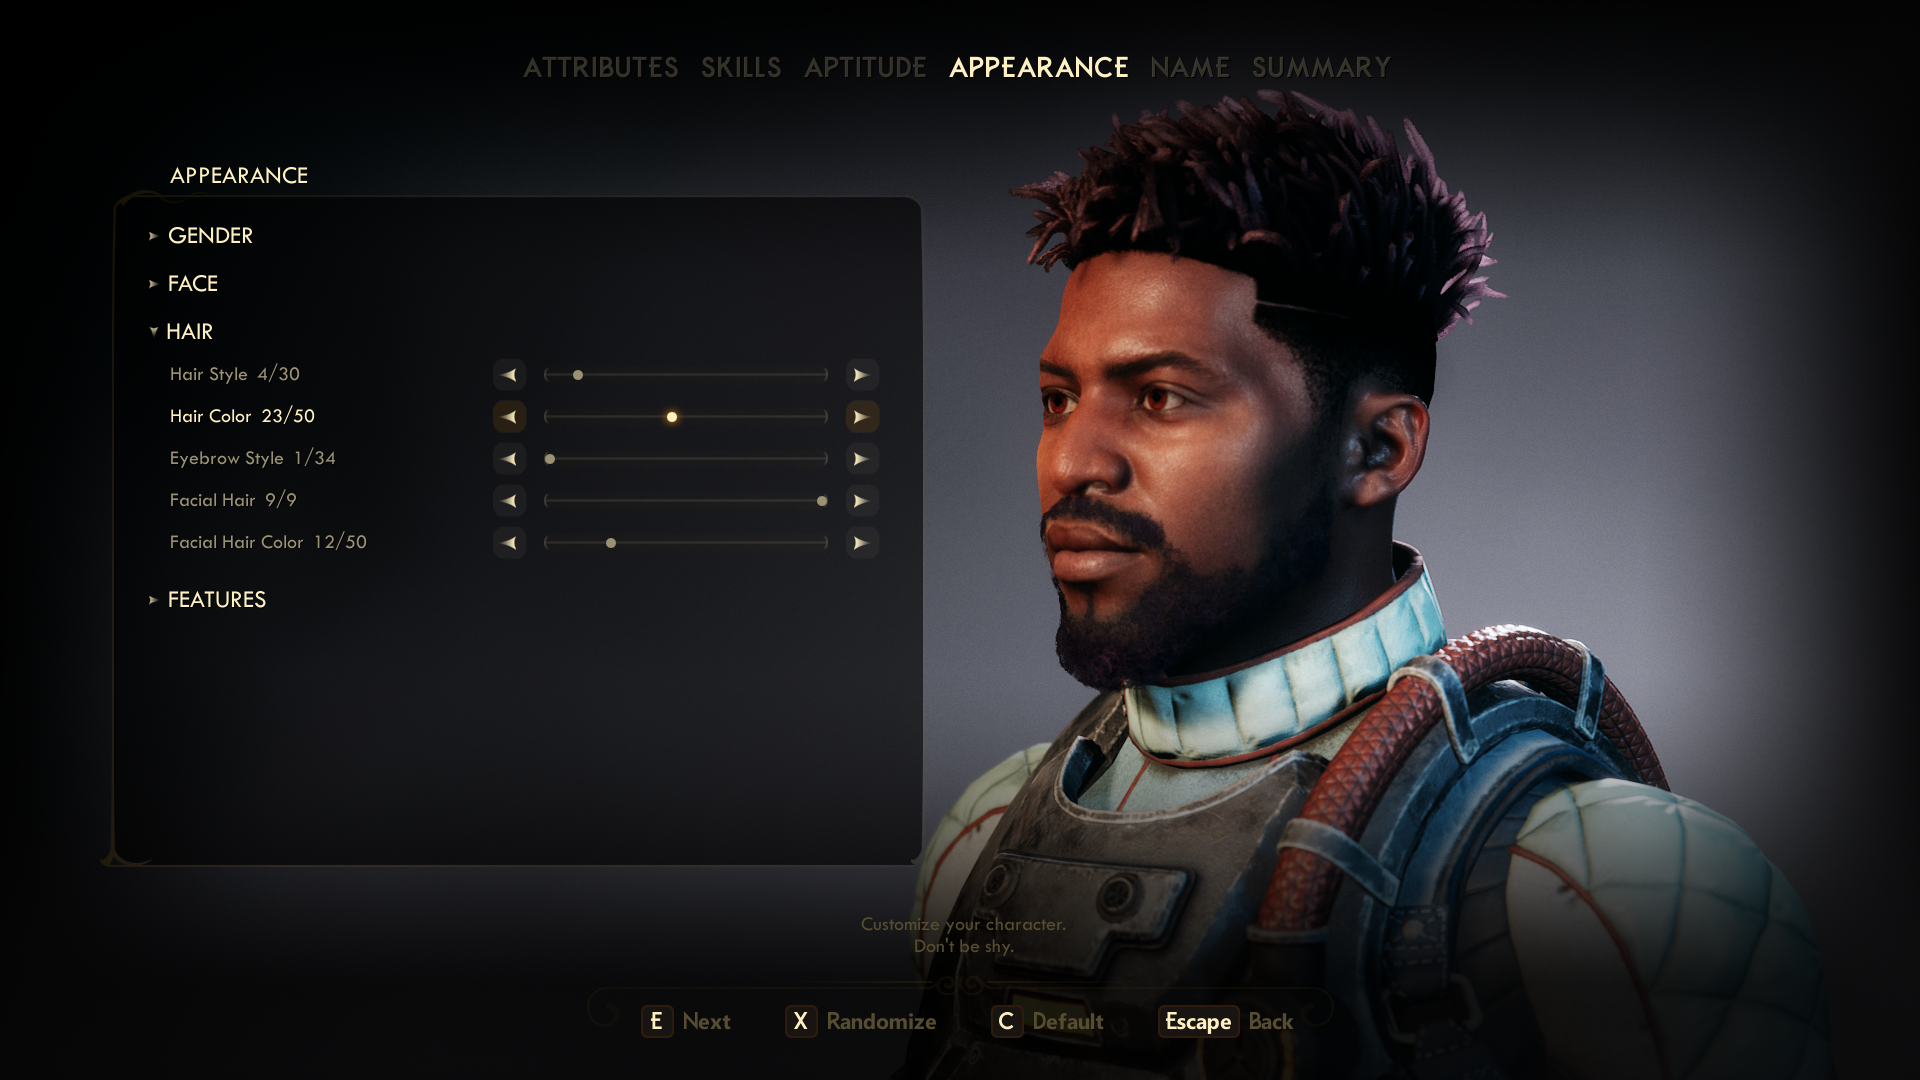 The Outer Worlds review – funny business